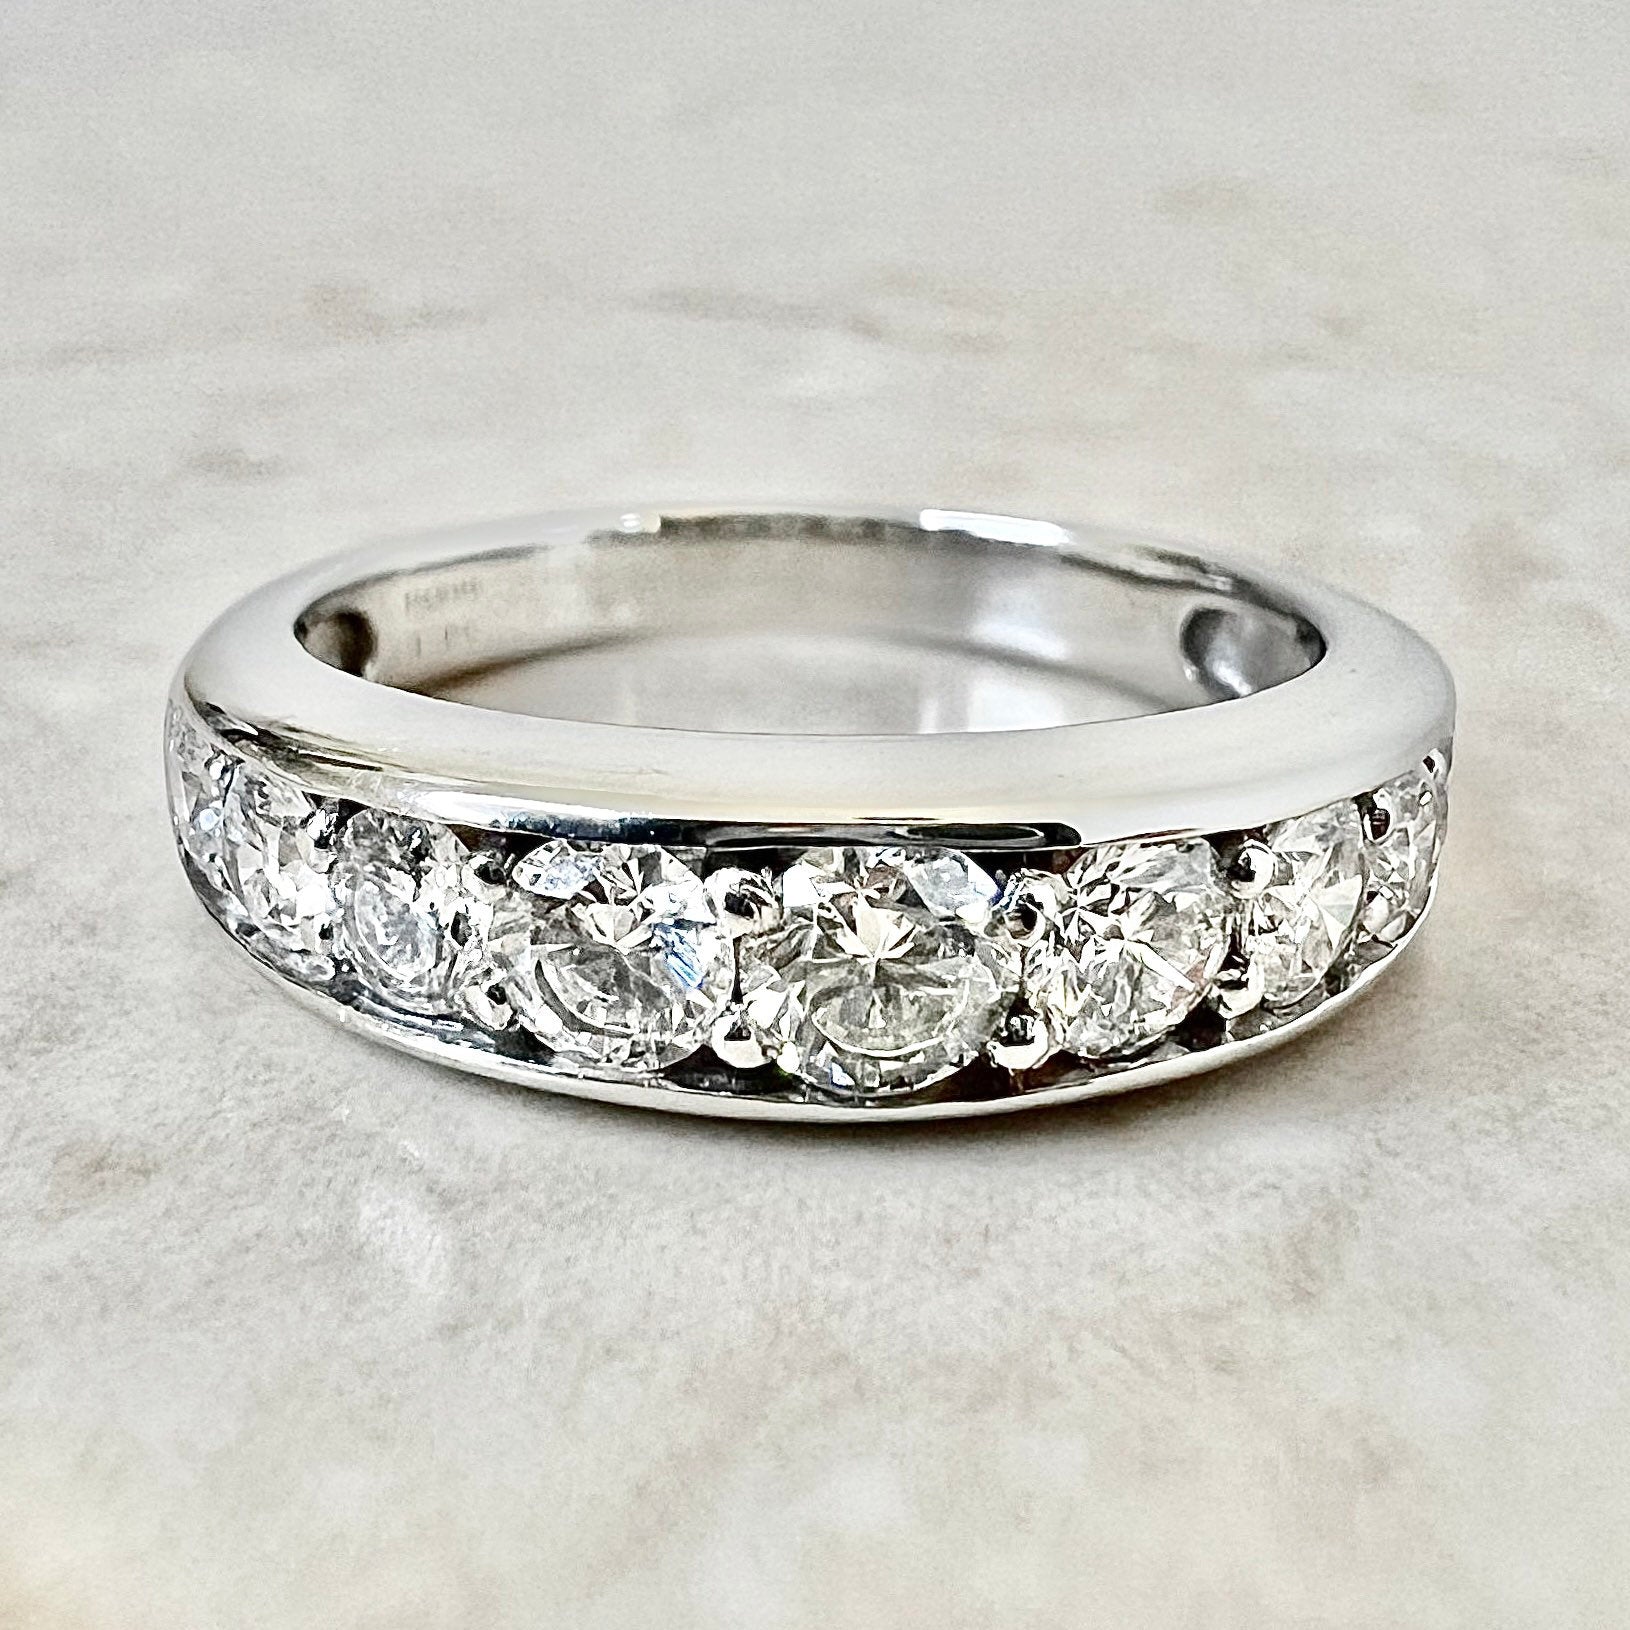 1 CT Vintage Platinum Half Eternity Diamond Band Ring - Platinum Eternity Ring - Diamond Ring - Anniversary Ring -Wedding Ring-Gifts For Her